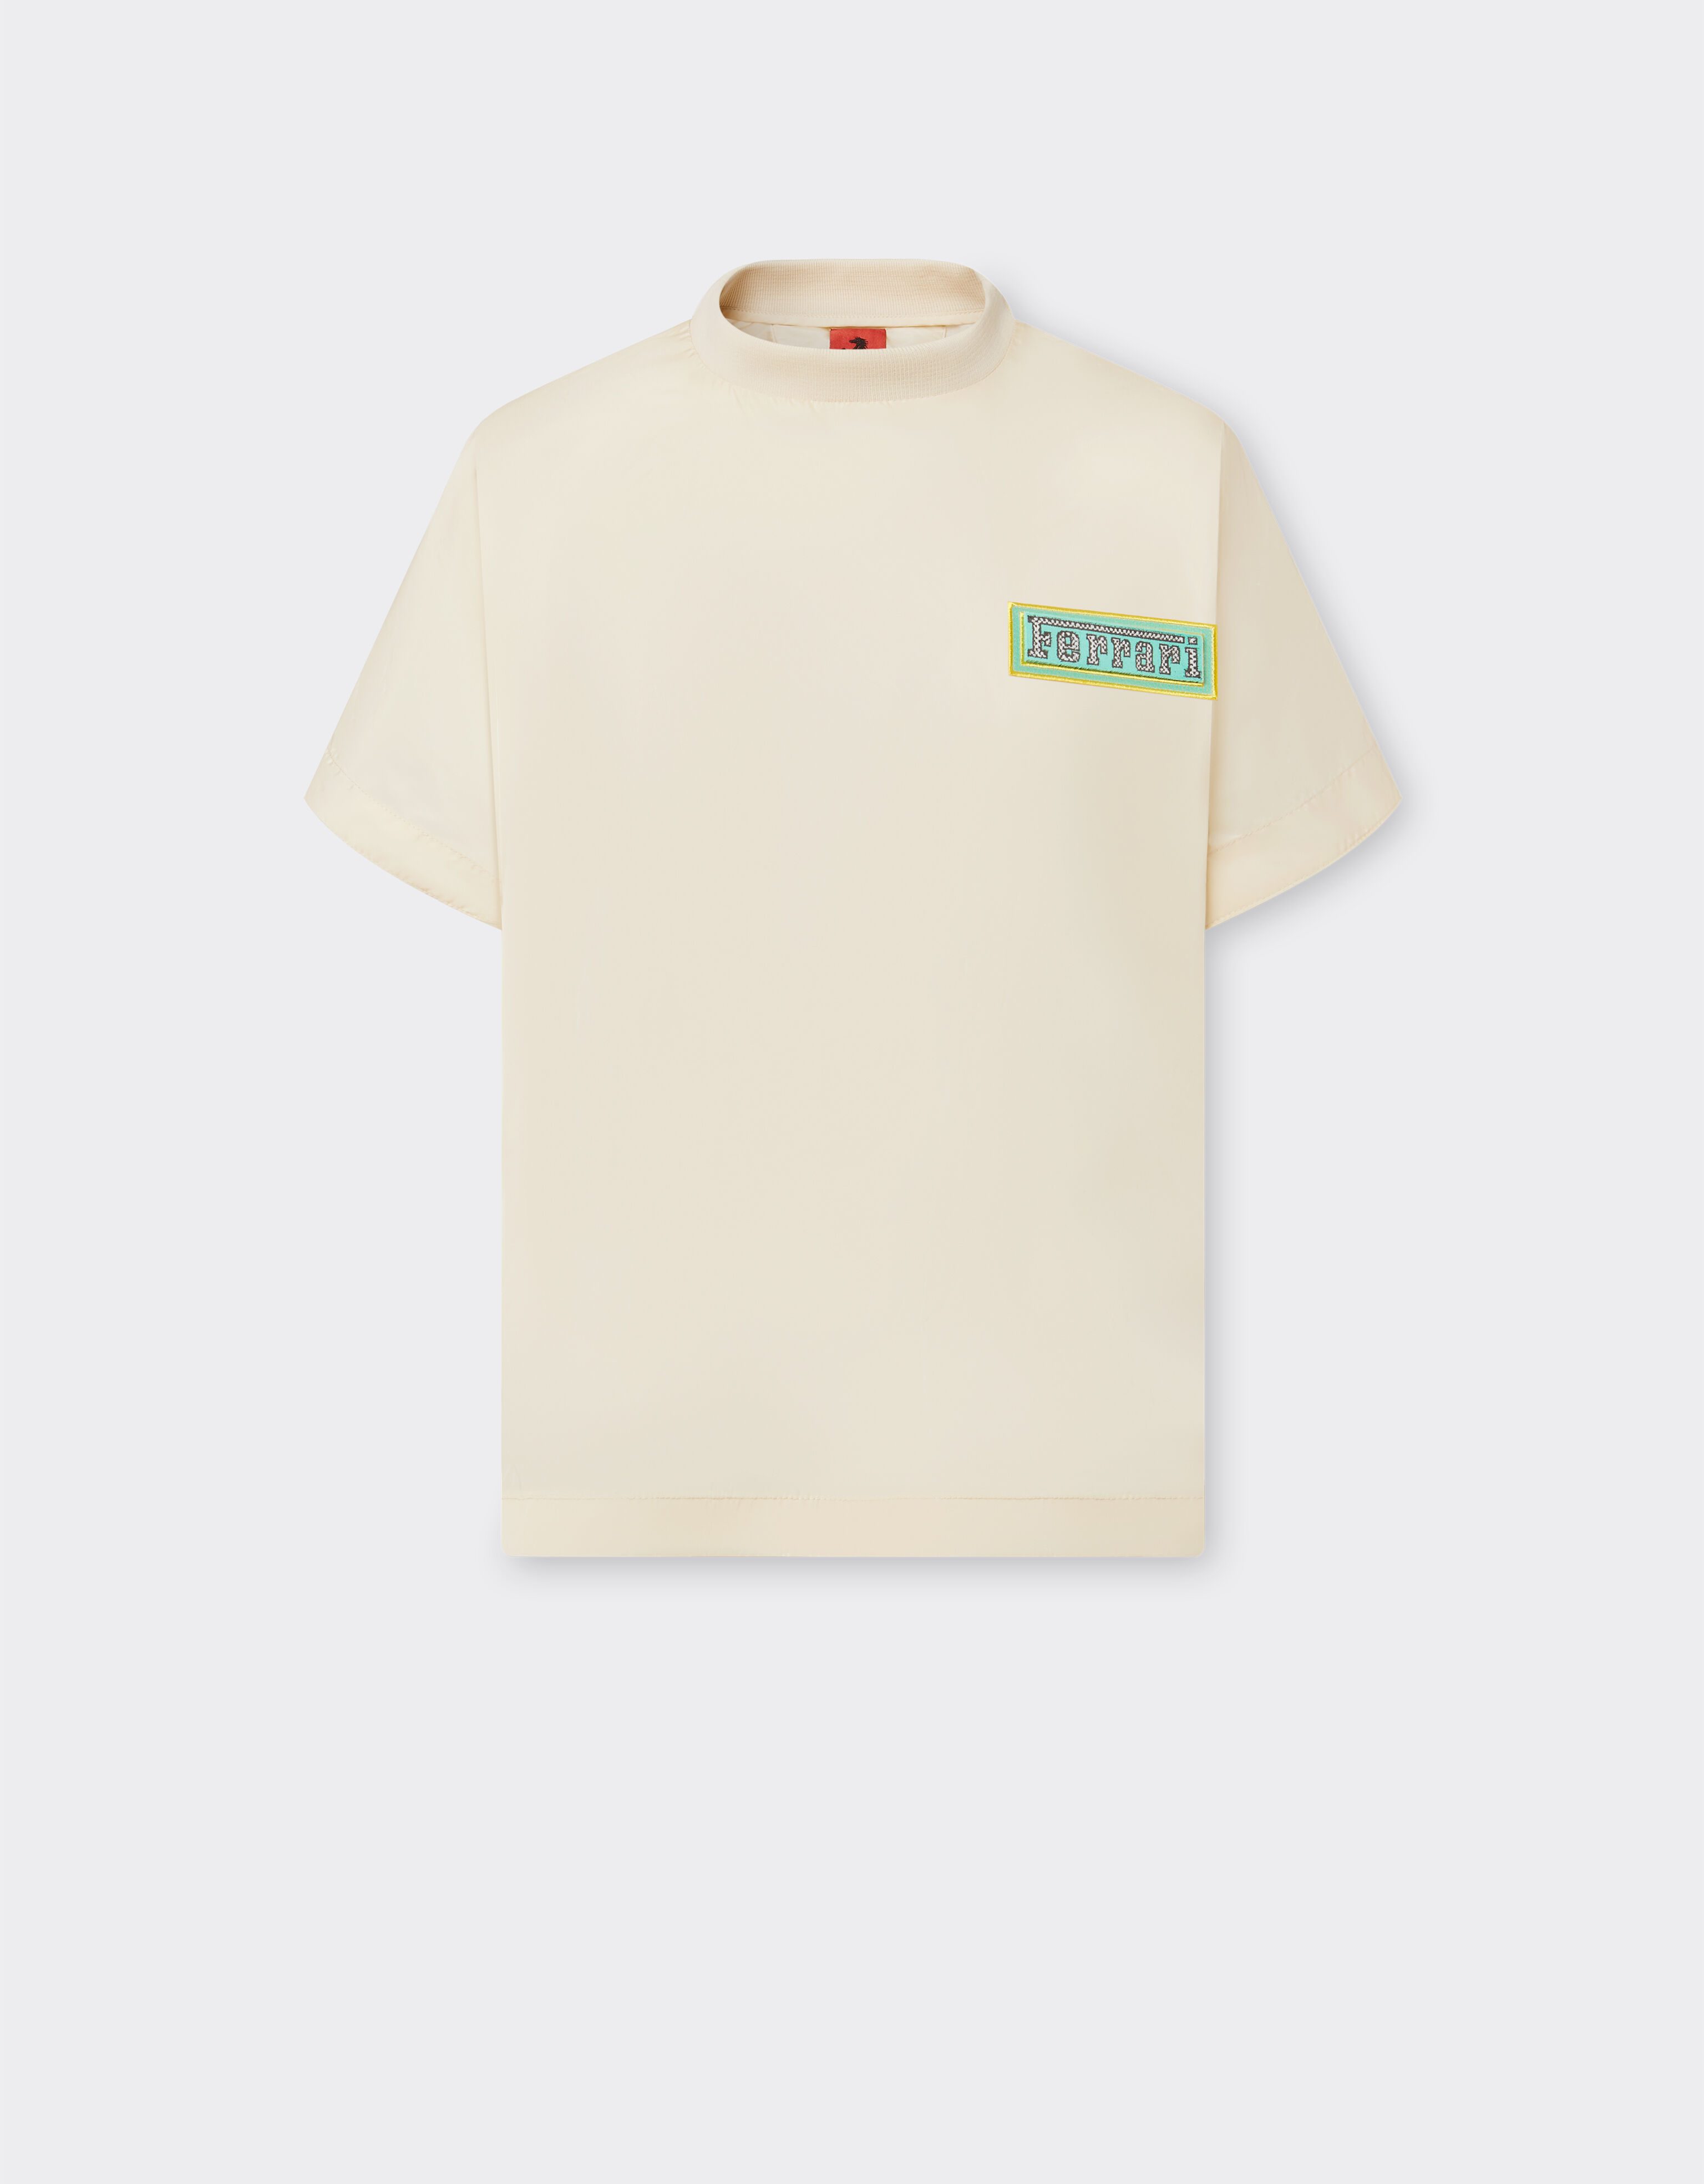 Ferrari Miami Collection T-shirt in recycled nylon Ivory 21249f